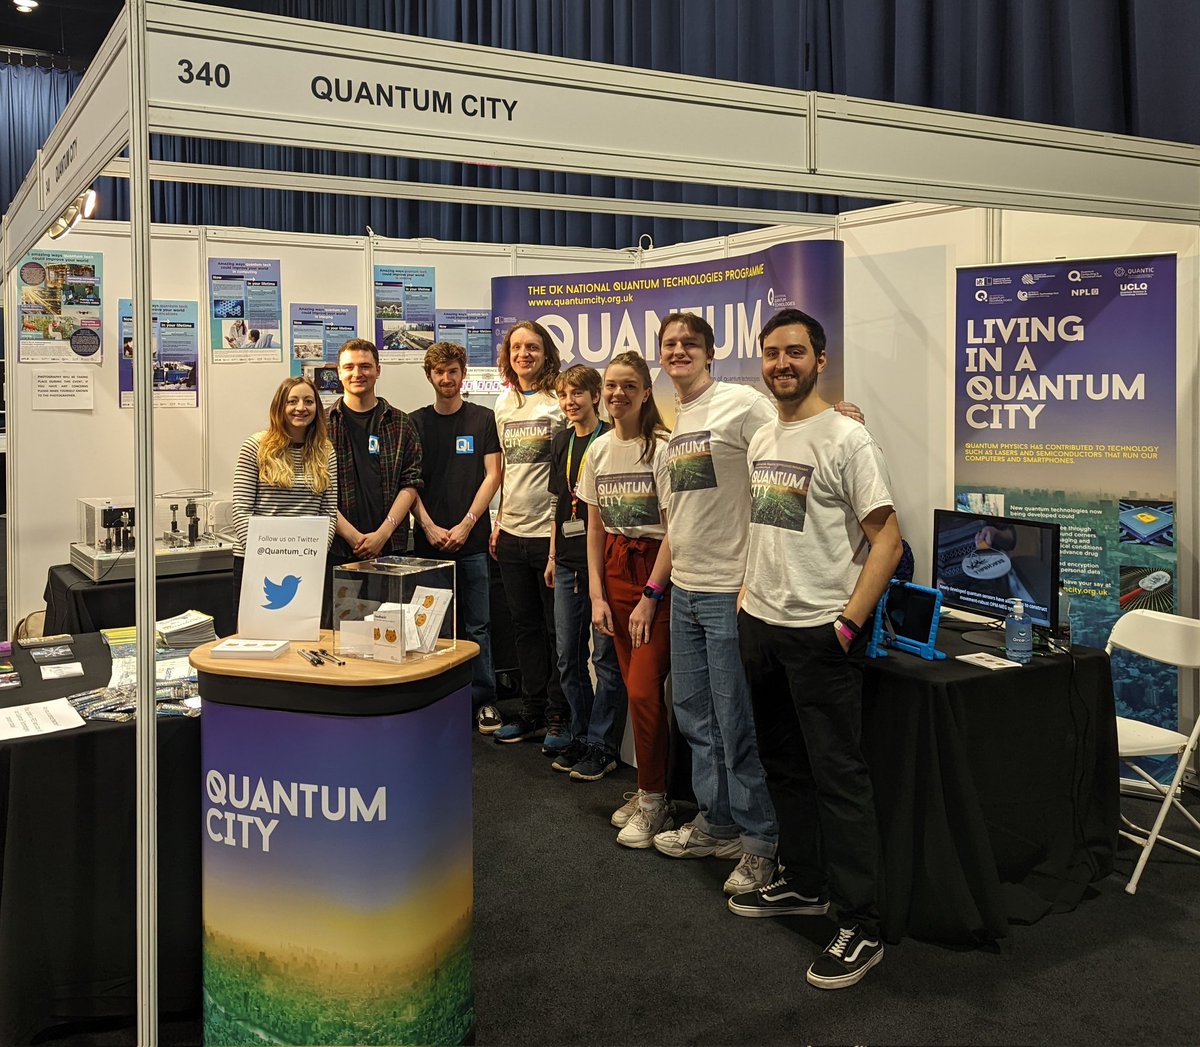 We're here at day 2 of New Scientist Live Manchester! It was great to see so many new faces yesterday, looking forward to seeing even more today! @Quantum_City is at stand 340 so head over to see us & try out our hands-on demonstrations! @newscievents #nslmanchester